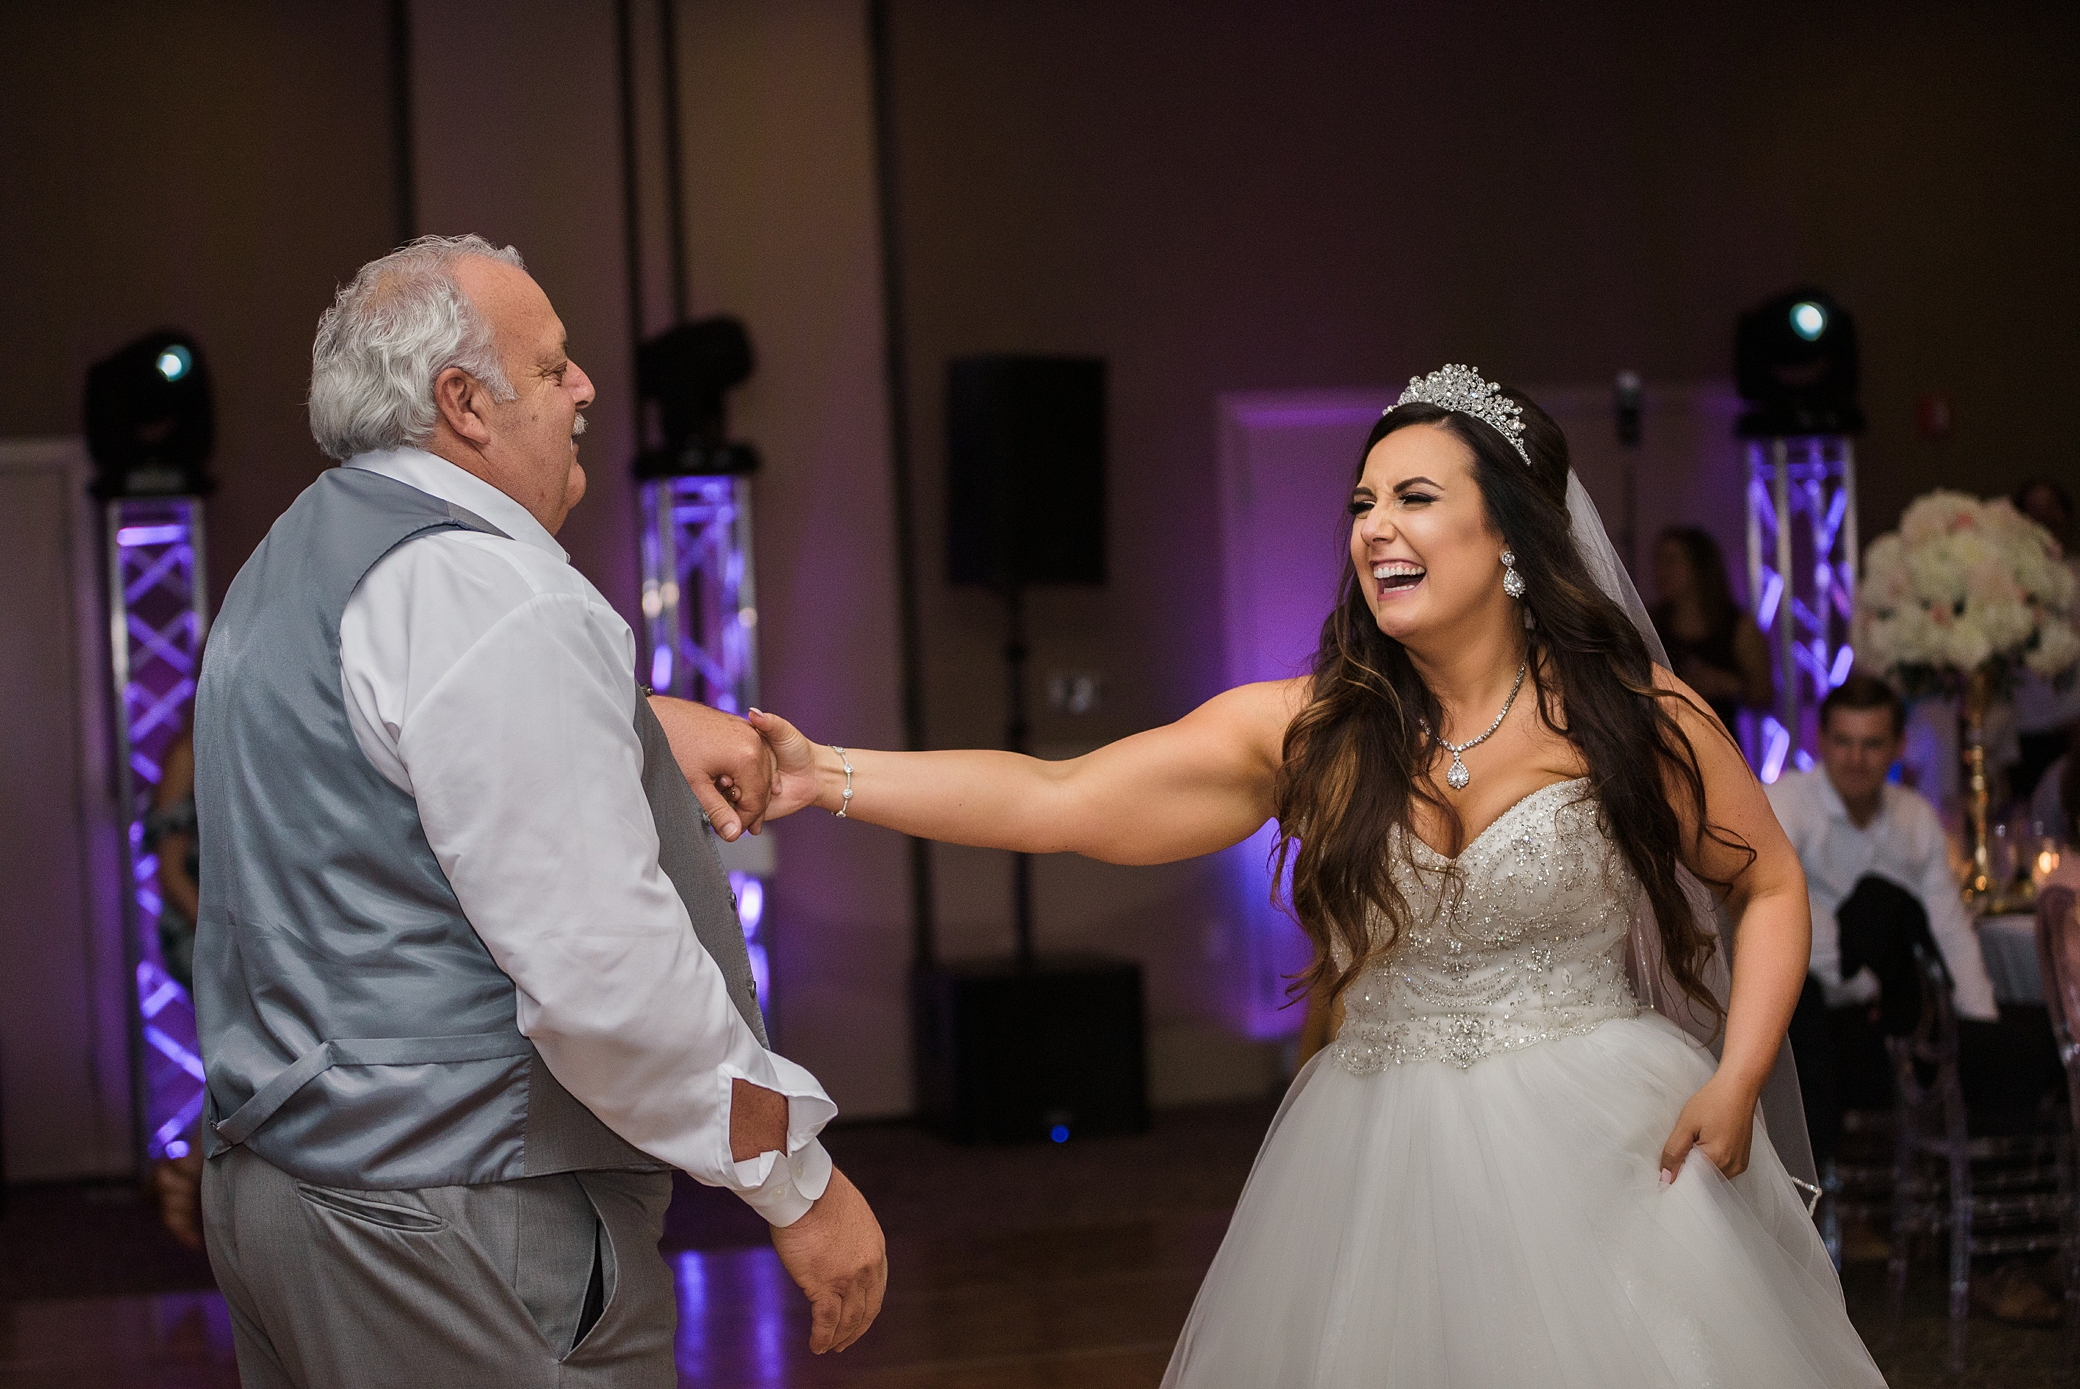 Father/daughter first dance at wedding in Olympia | Megan Montalvo Photography